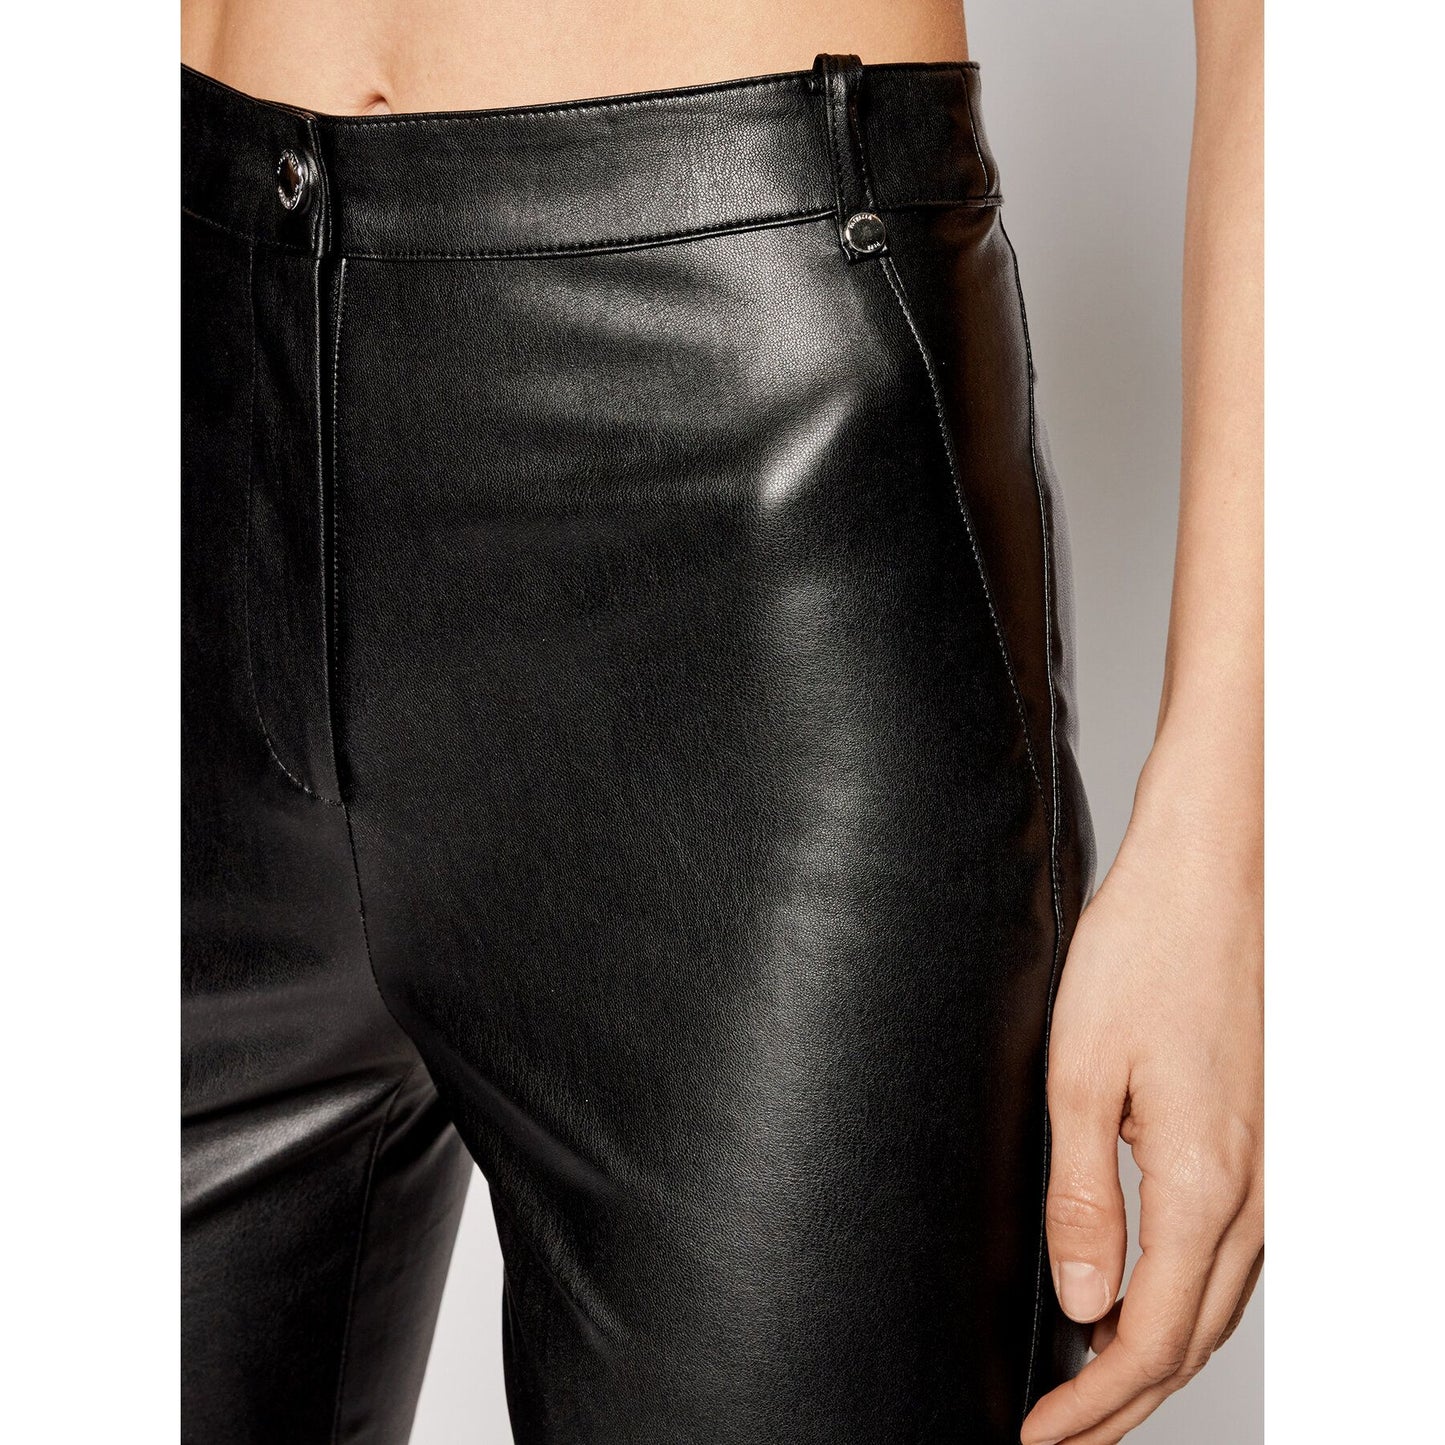 Chic Faux Leather Trousers with Zip Detail